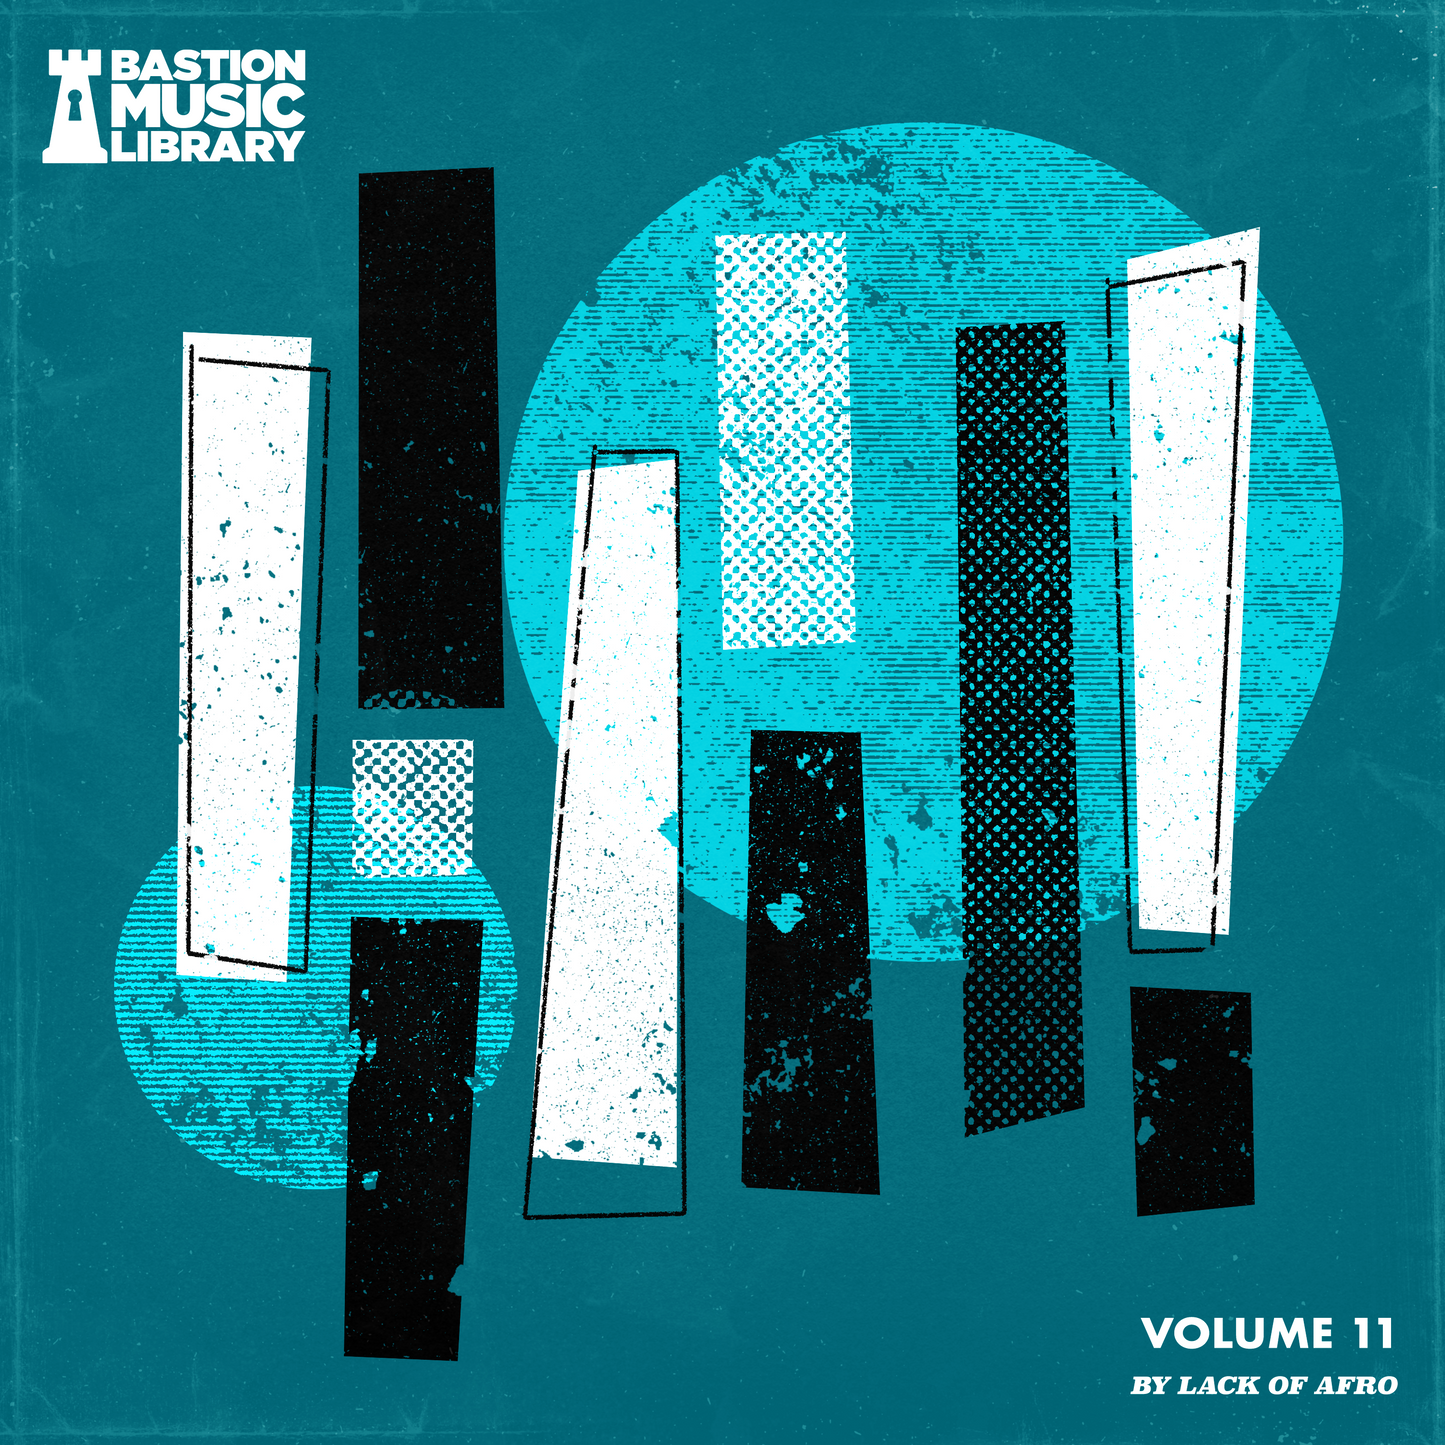 Volume 11 by Lack of Afro